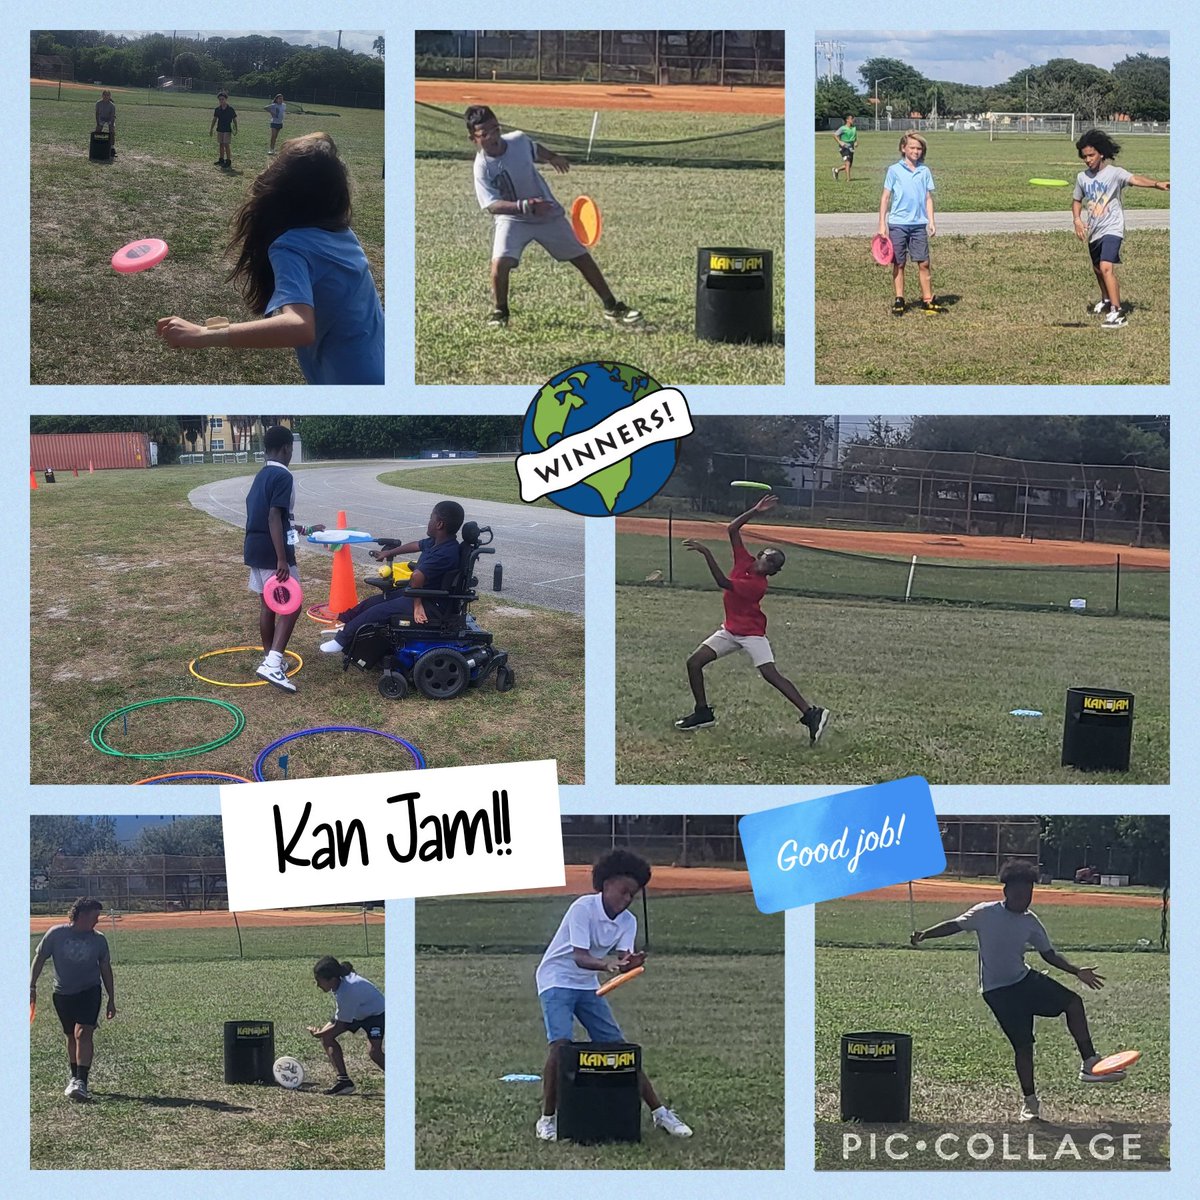 Disc-throwing accuracy was strong this week as 6th grade started @kanjam! Lots of dingers, deuces, buckets, instant wins, and some acrobatic dives. #cmmspe #pbcpe #discgames #kanjam #activekids